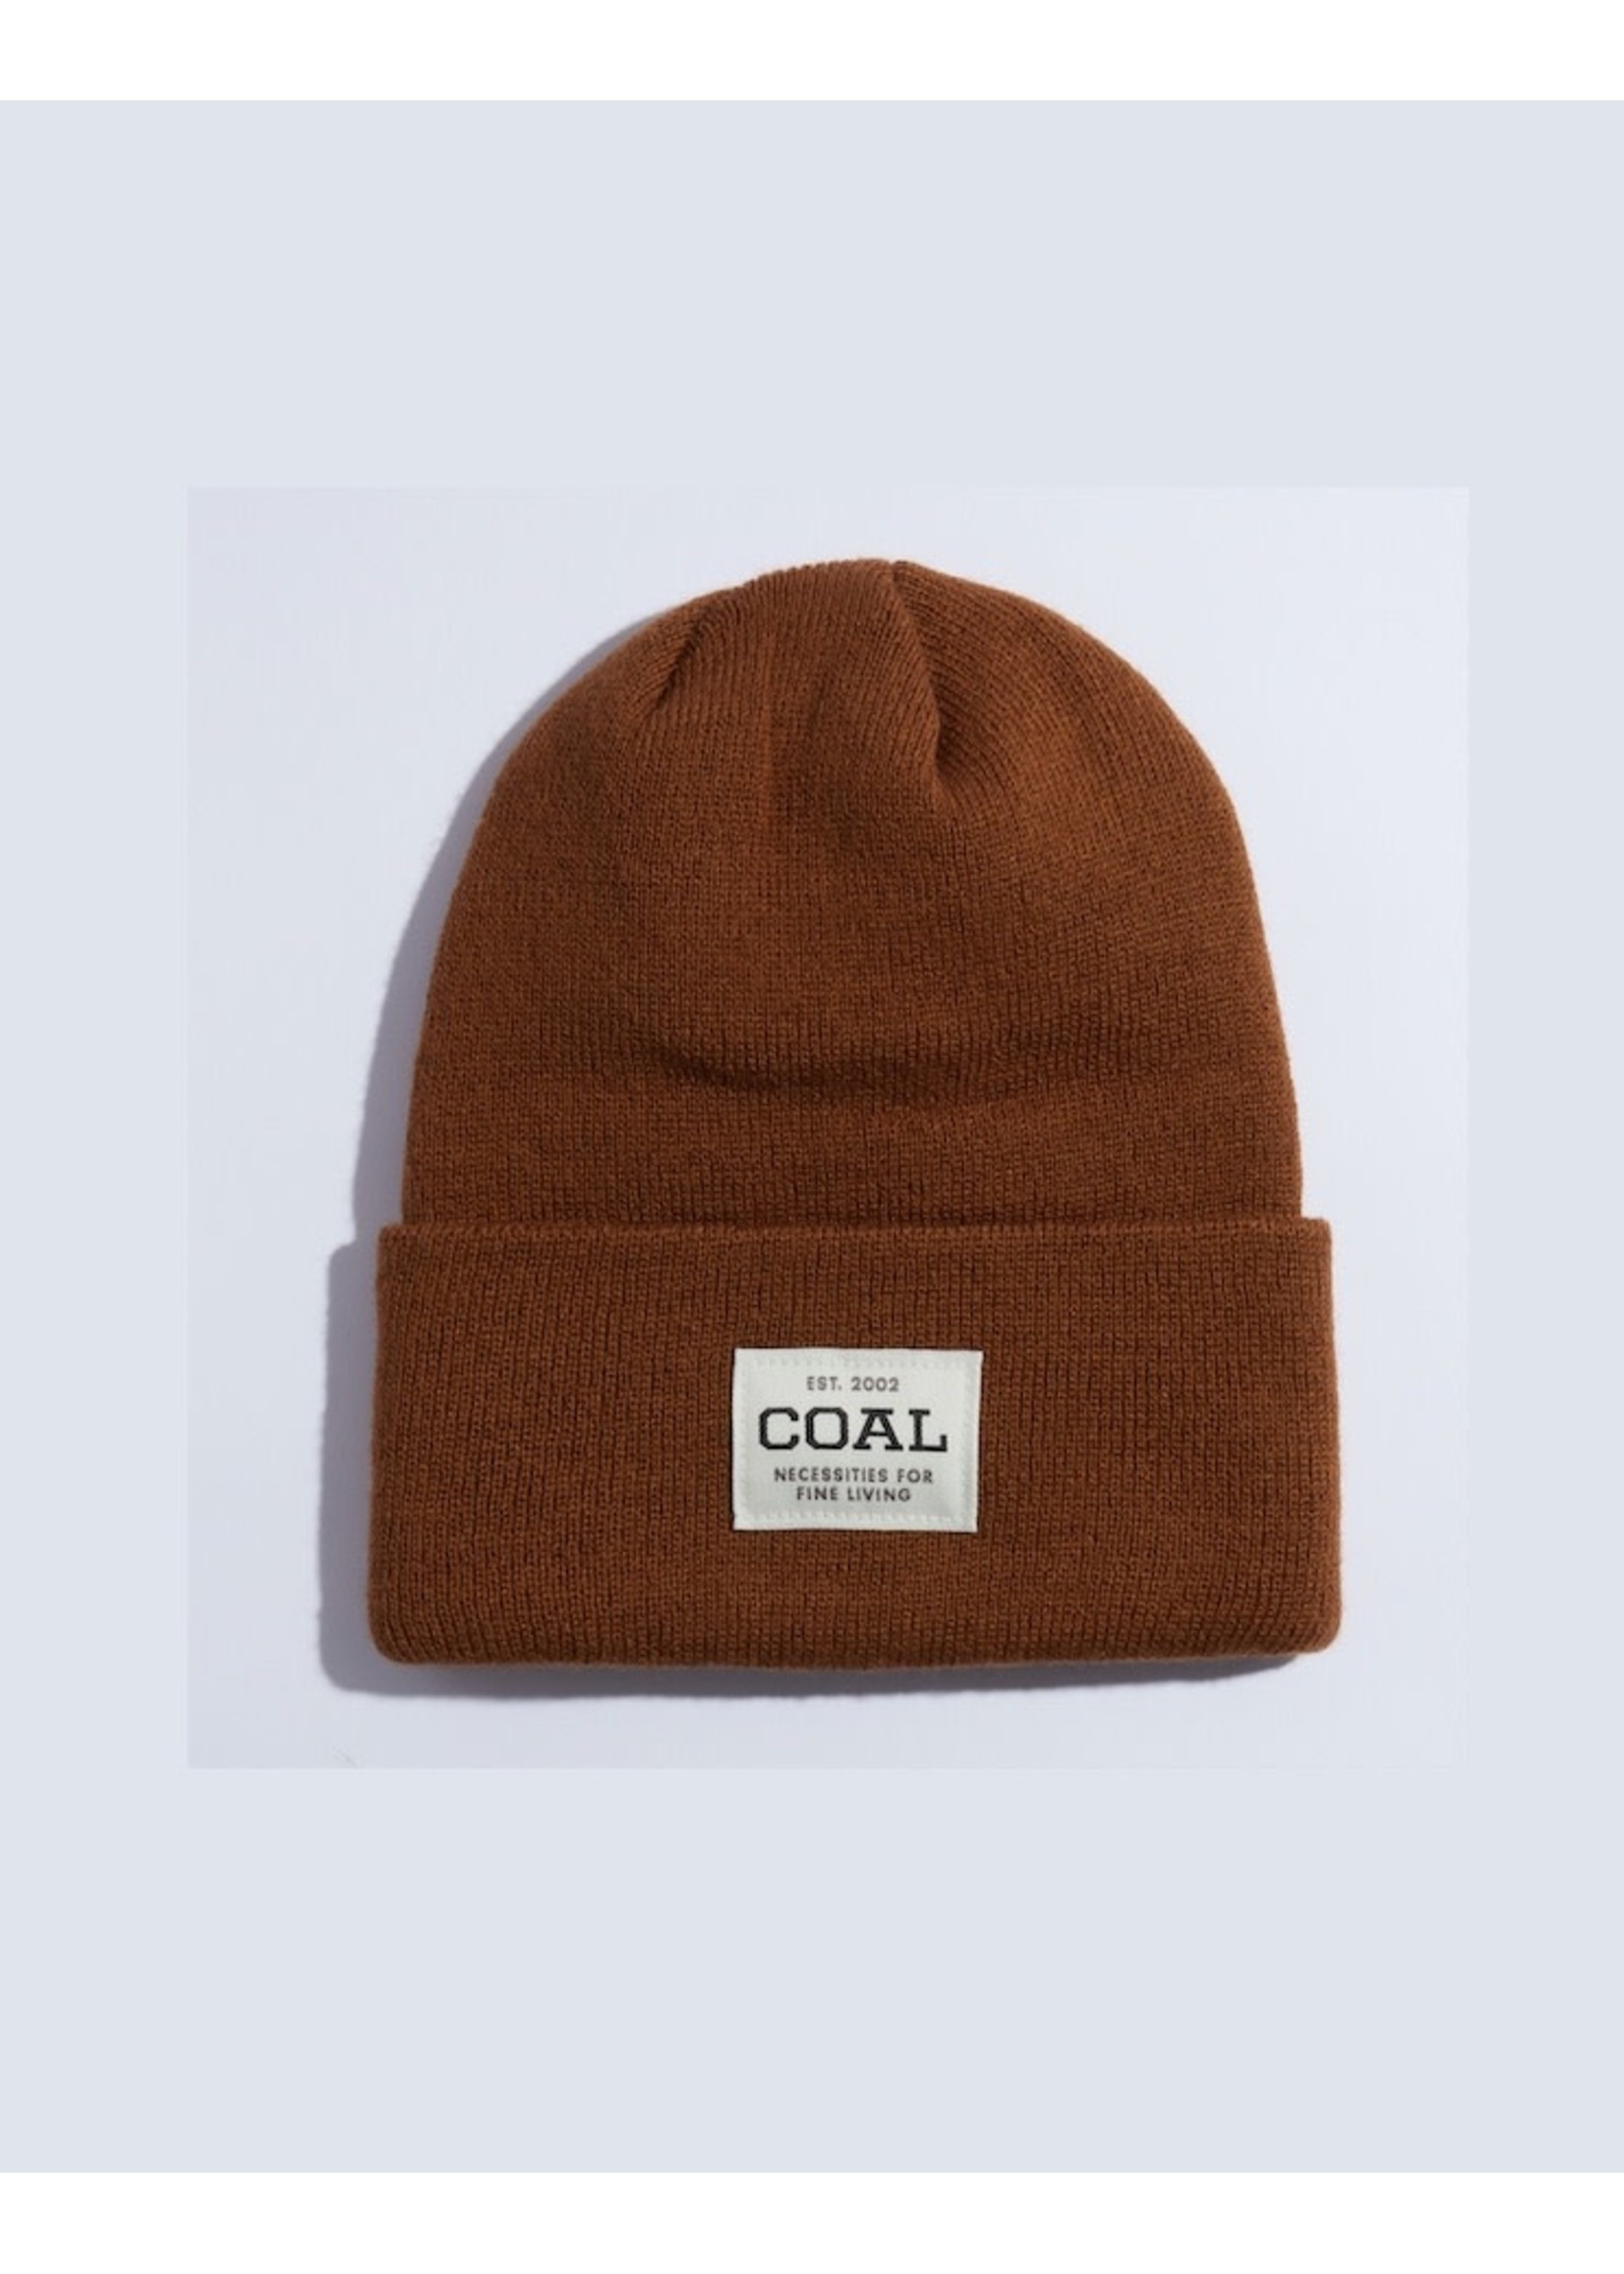 Coal Coal, The Adult Uniform Recycled Knit Cuff Beanie